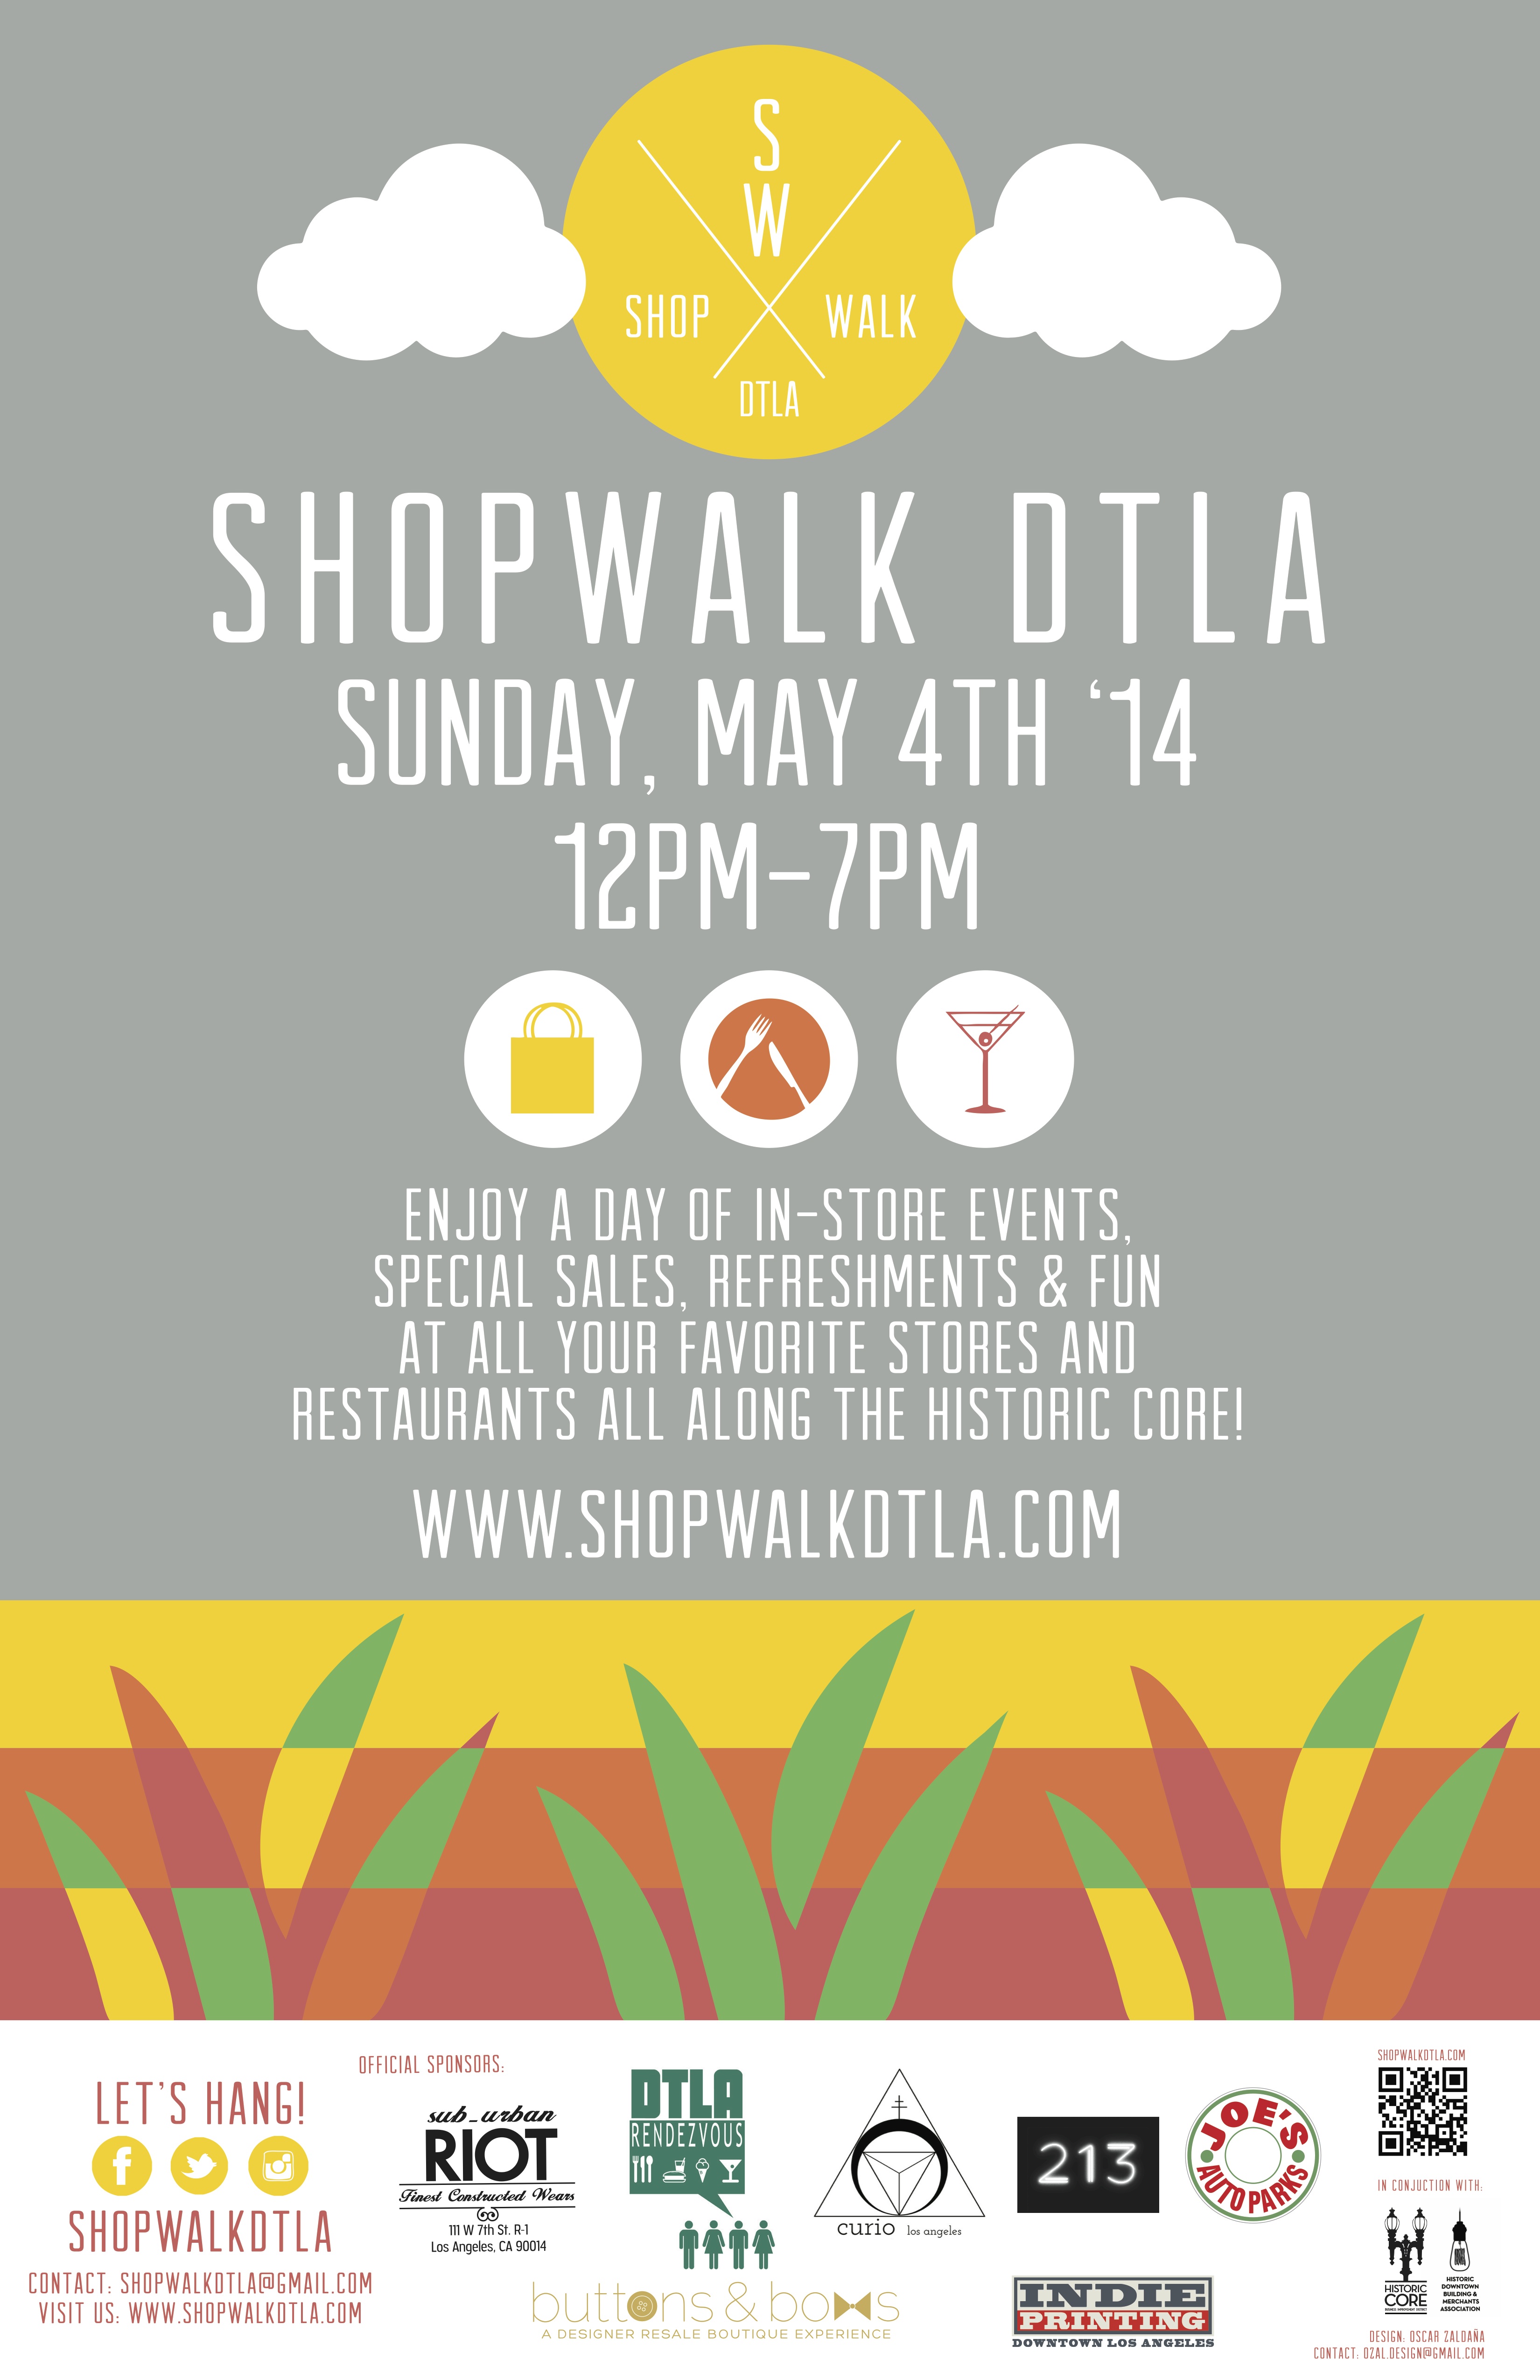 ShopWalk Brings Shopping & Dining Deals to DTLA on Sunday, May 4th